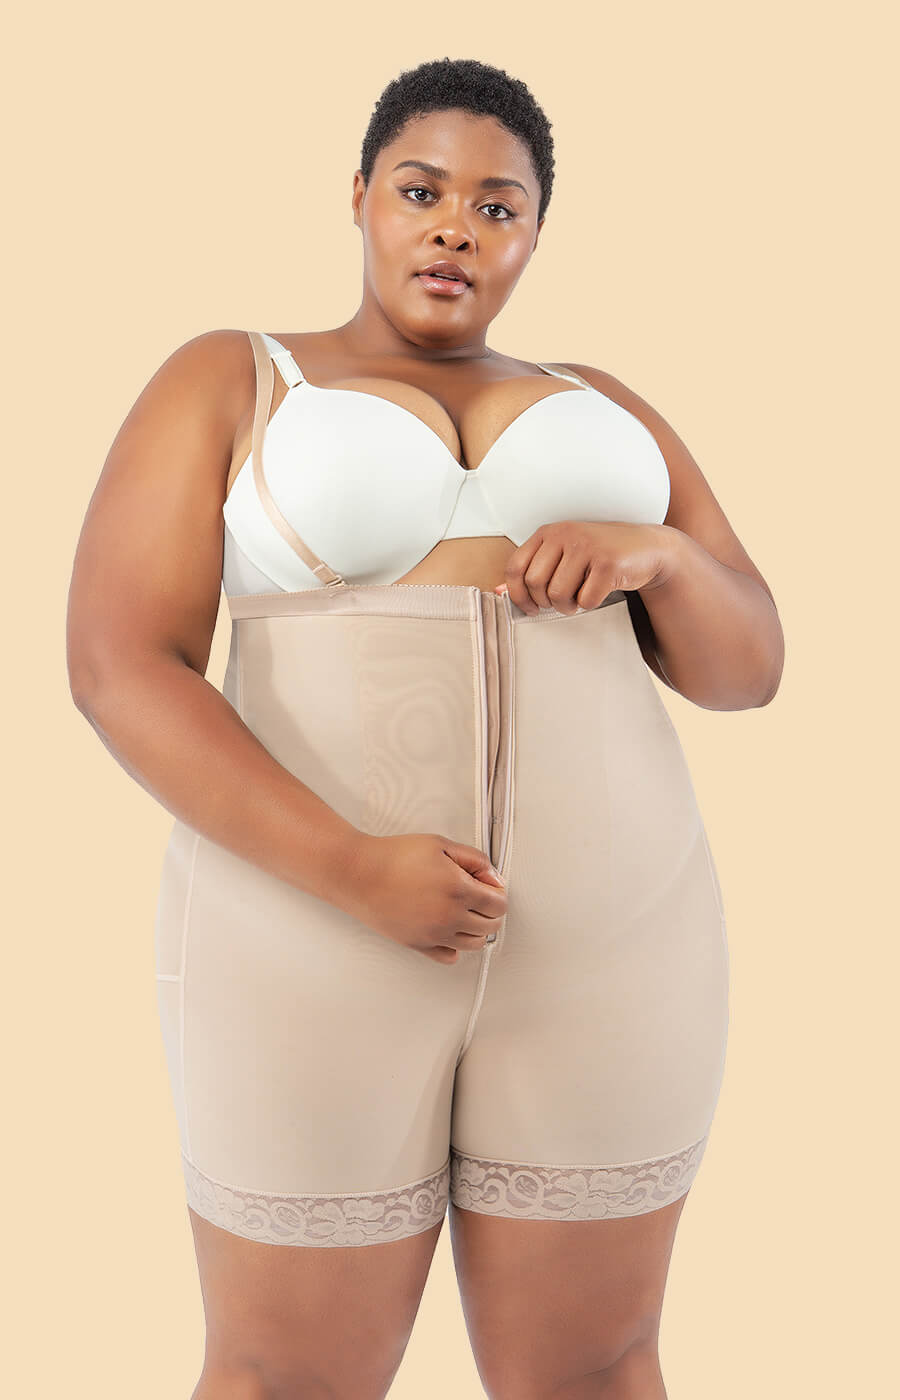 7 Plus Size Strong Body Shapers ideas